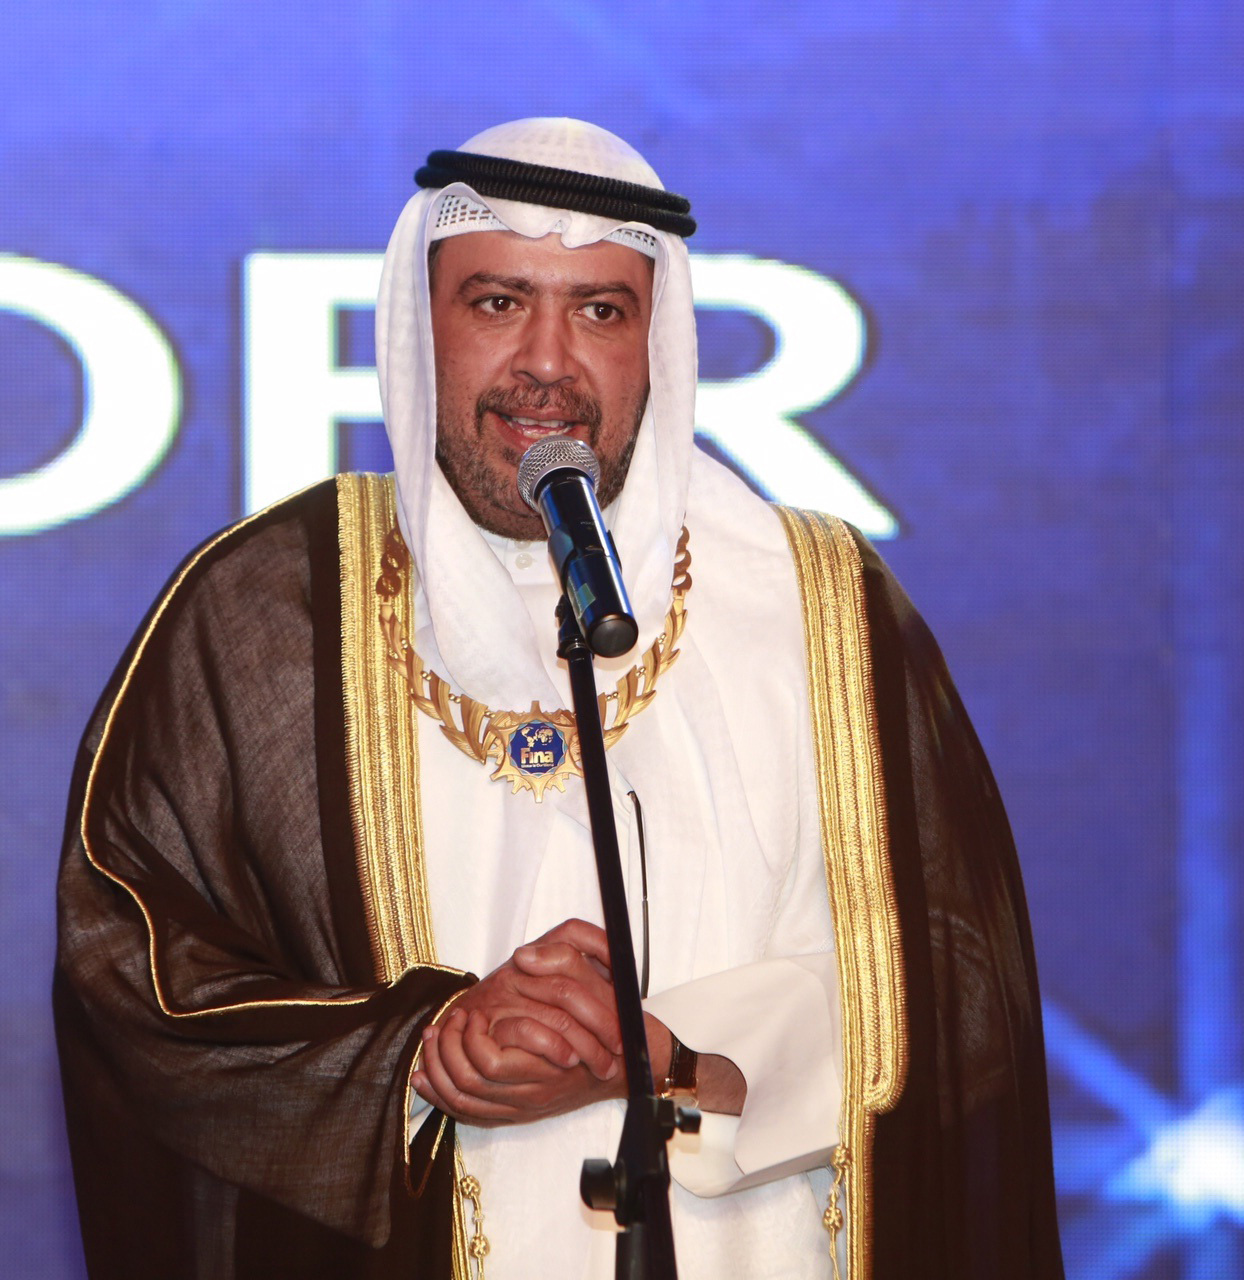 President of the Association of National Olympic Committees ANOC Sheikh Ahmad Fahad Al-Sabah has received a special award from FINA ©FINA